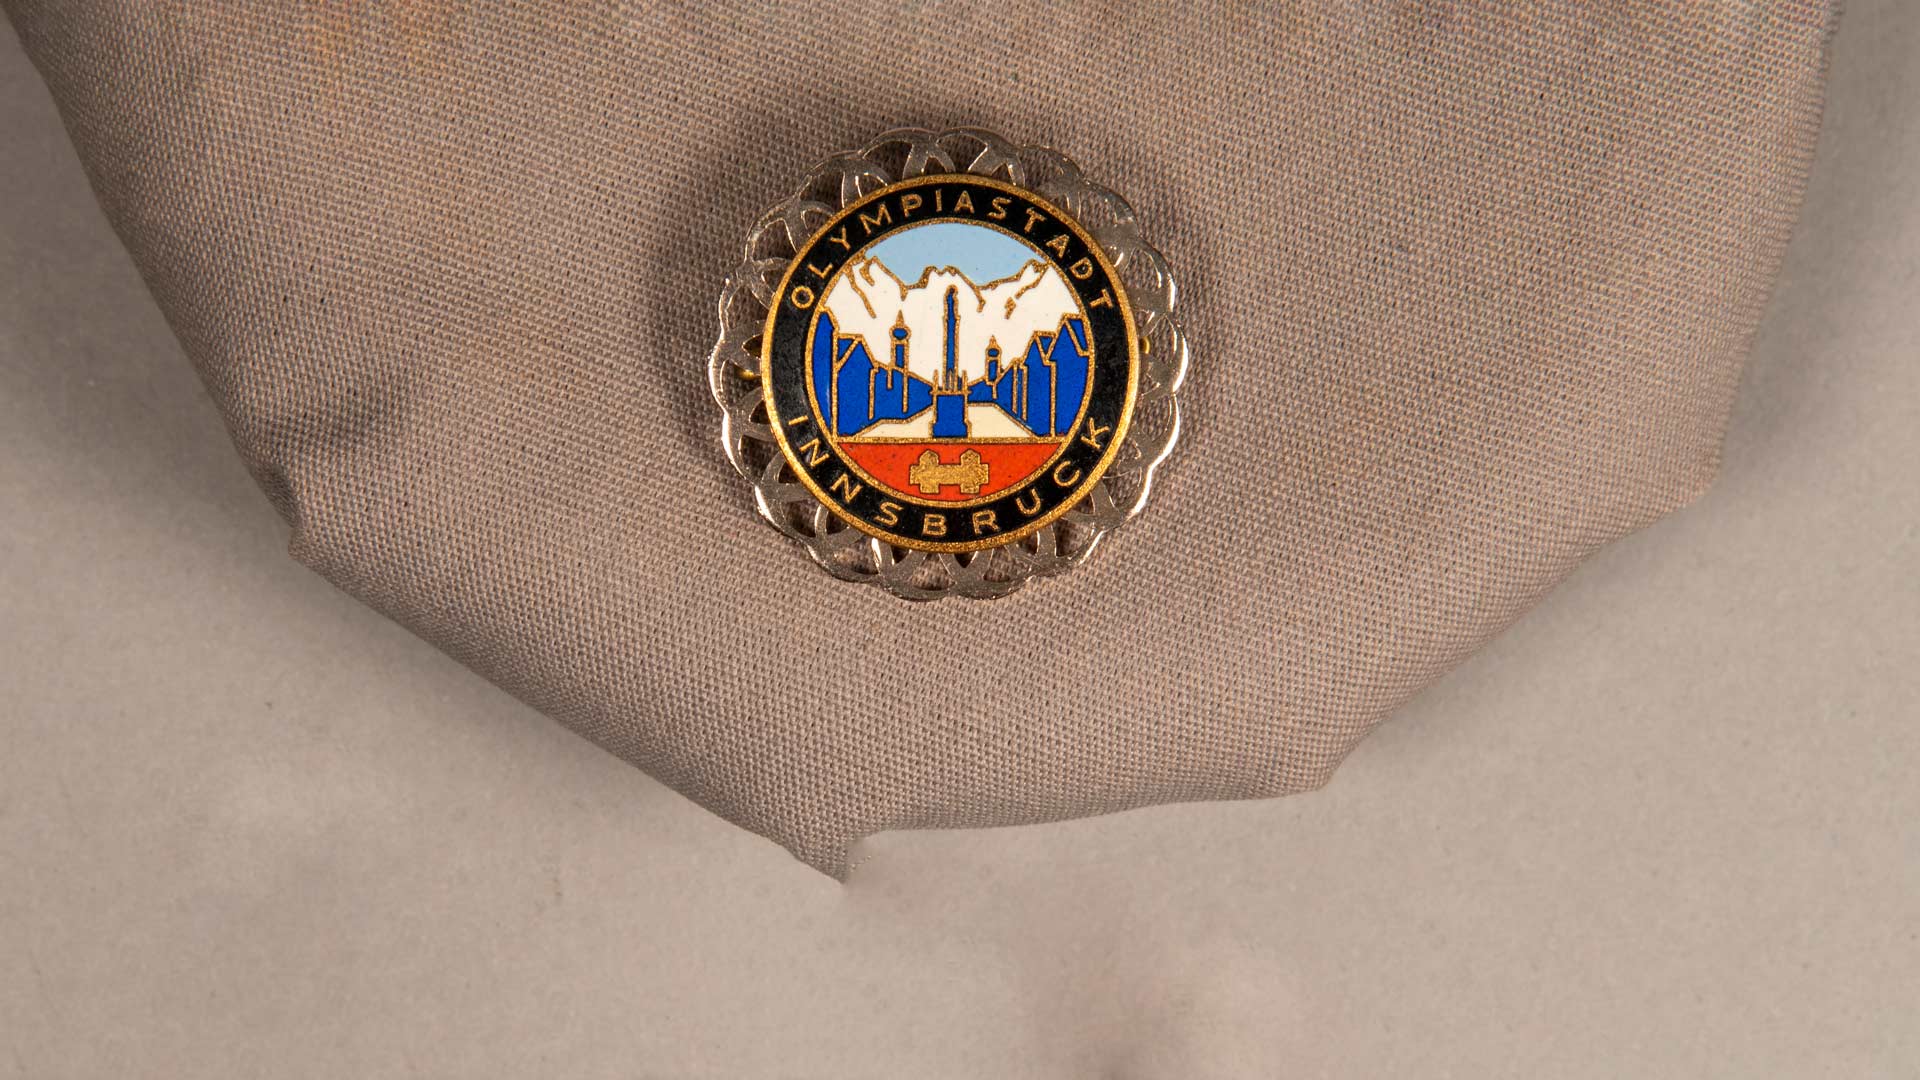 pin from 1976 Winter Olympics